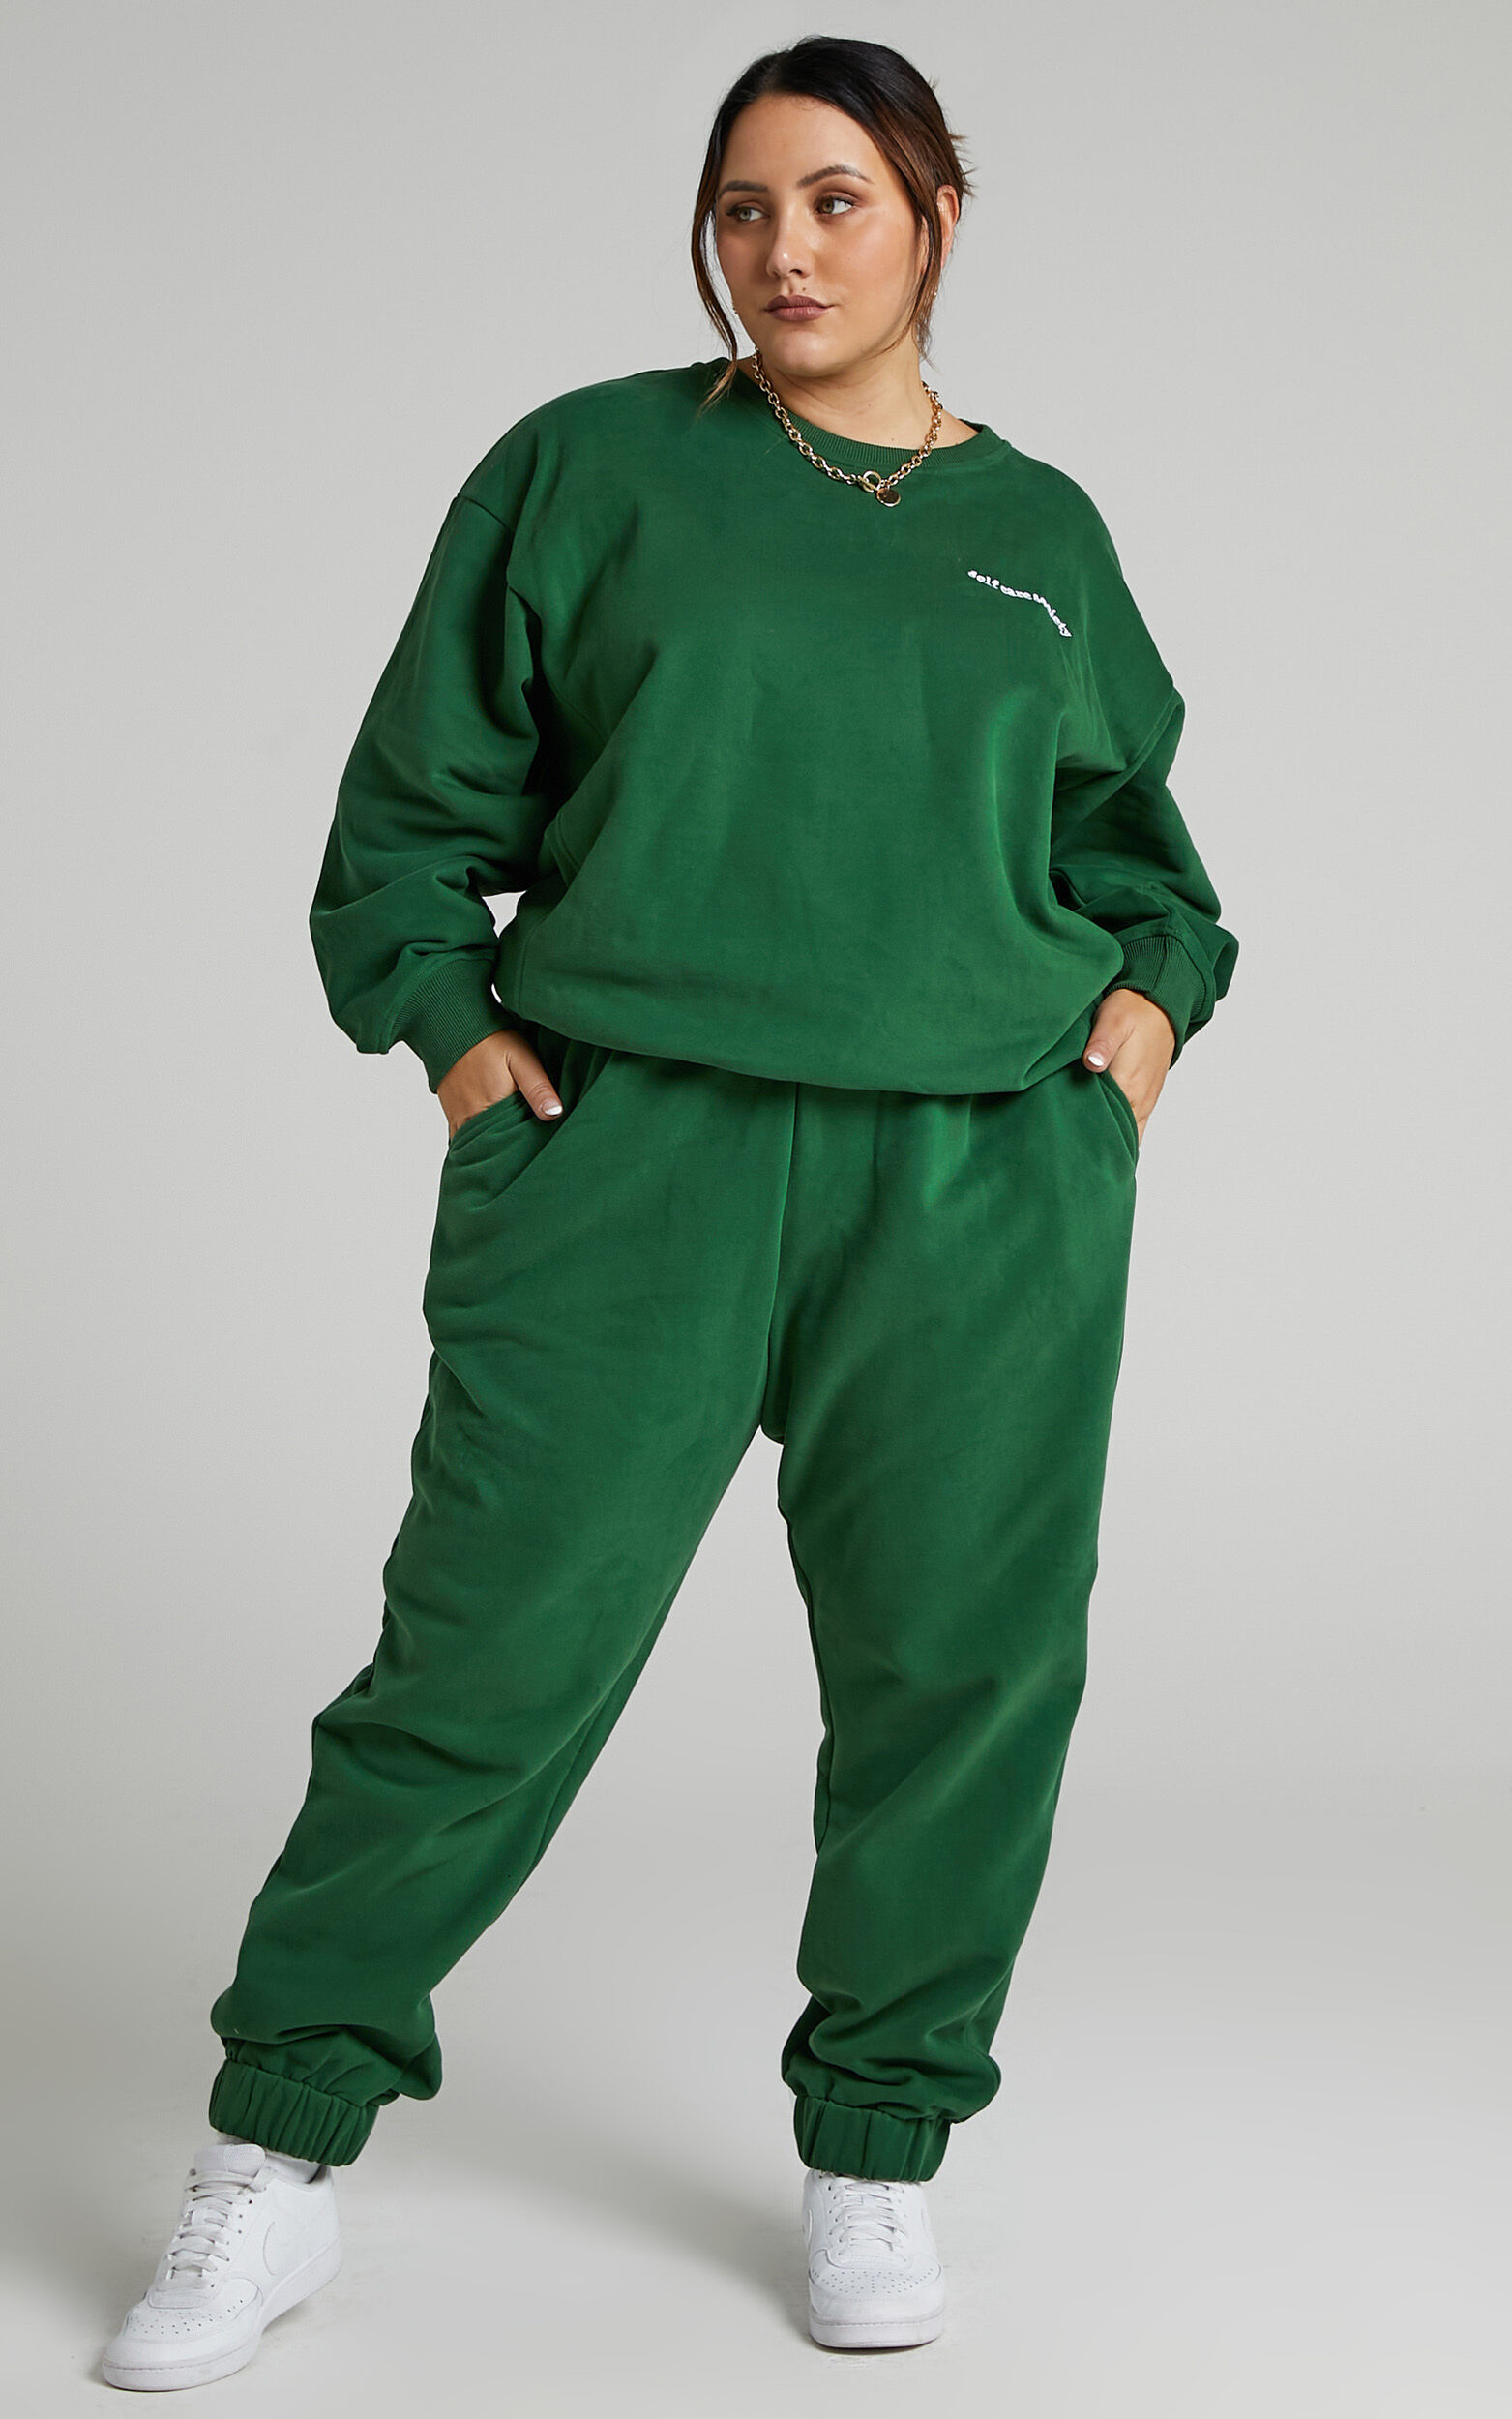 Sunday Society Club - Maddie Sweatpants in Green - 04, GRN4, super-hi-res image number null